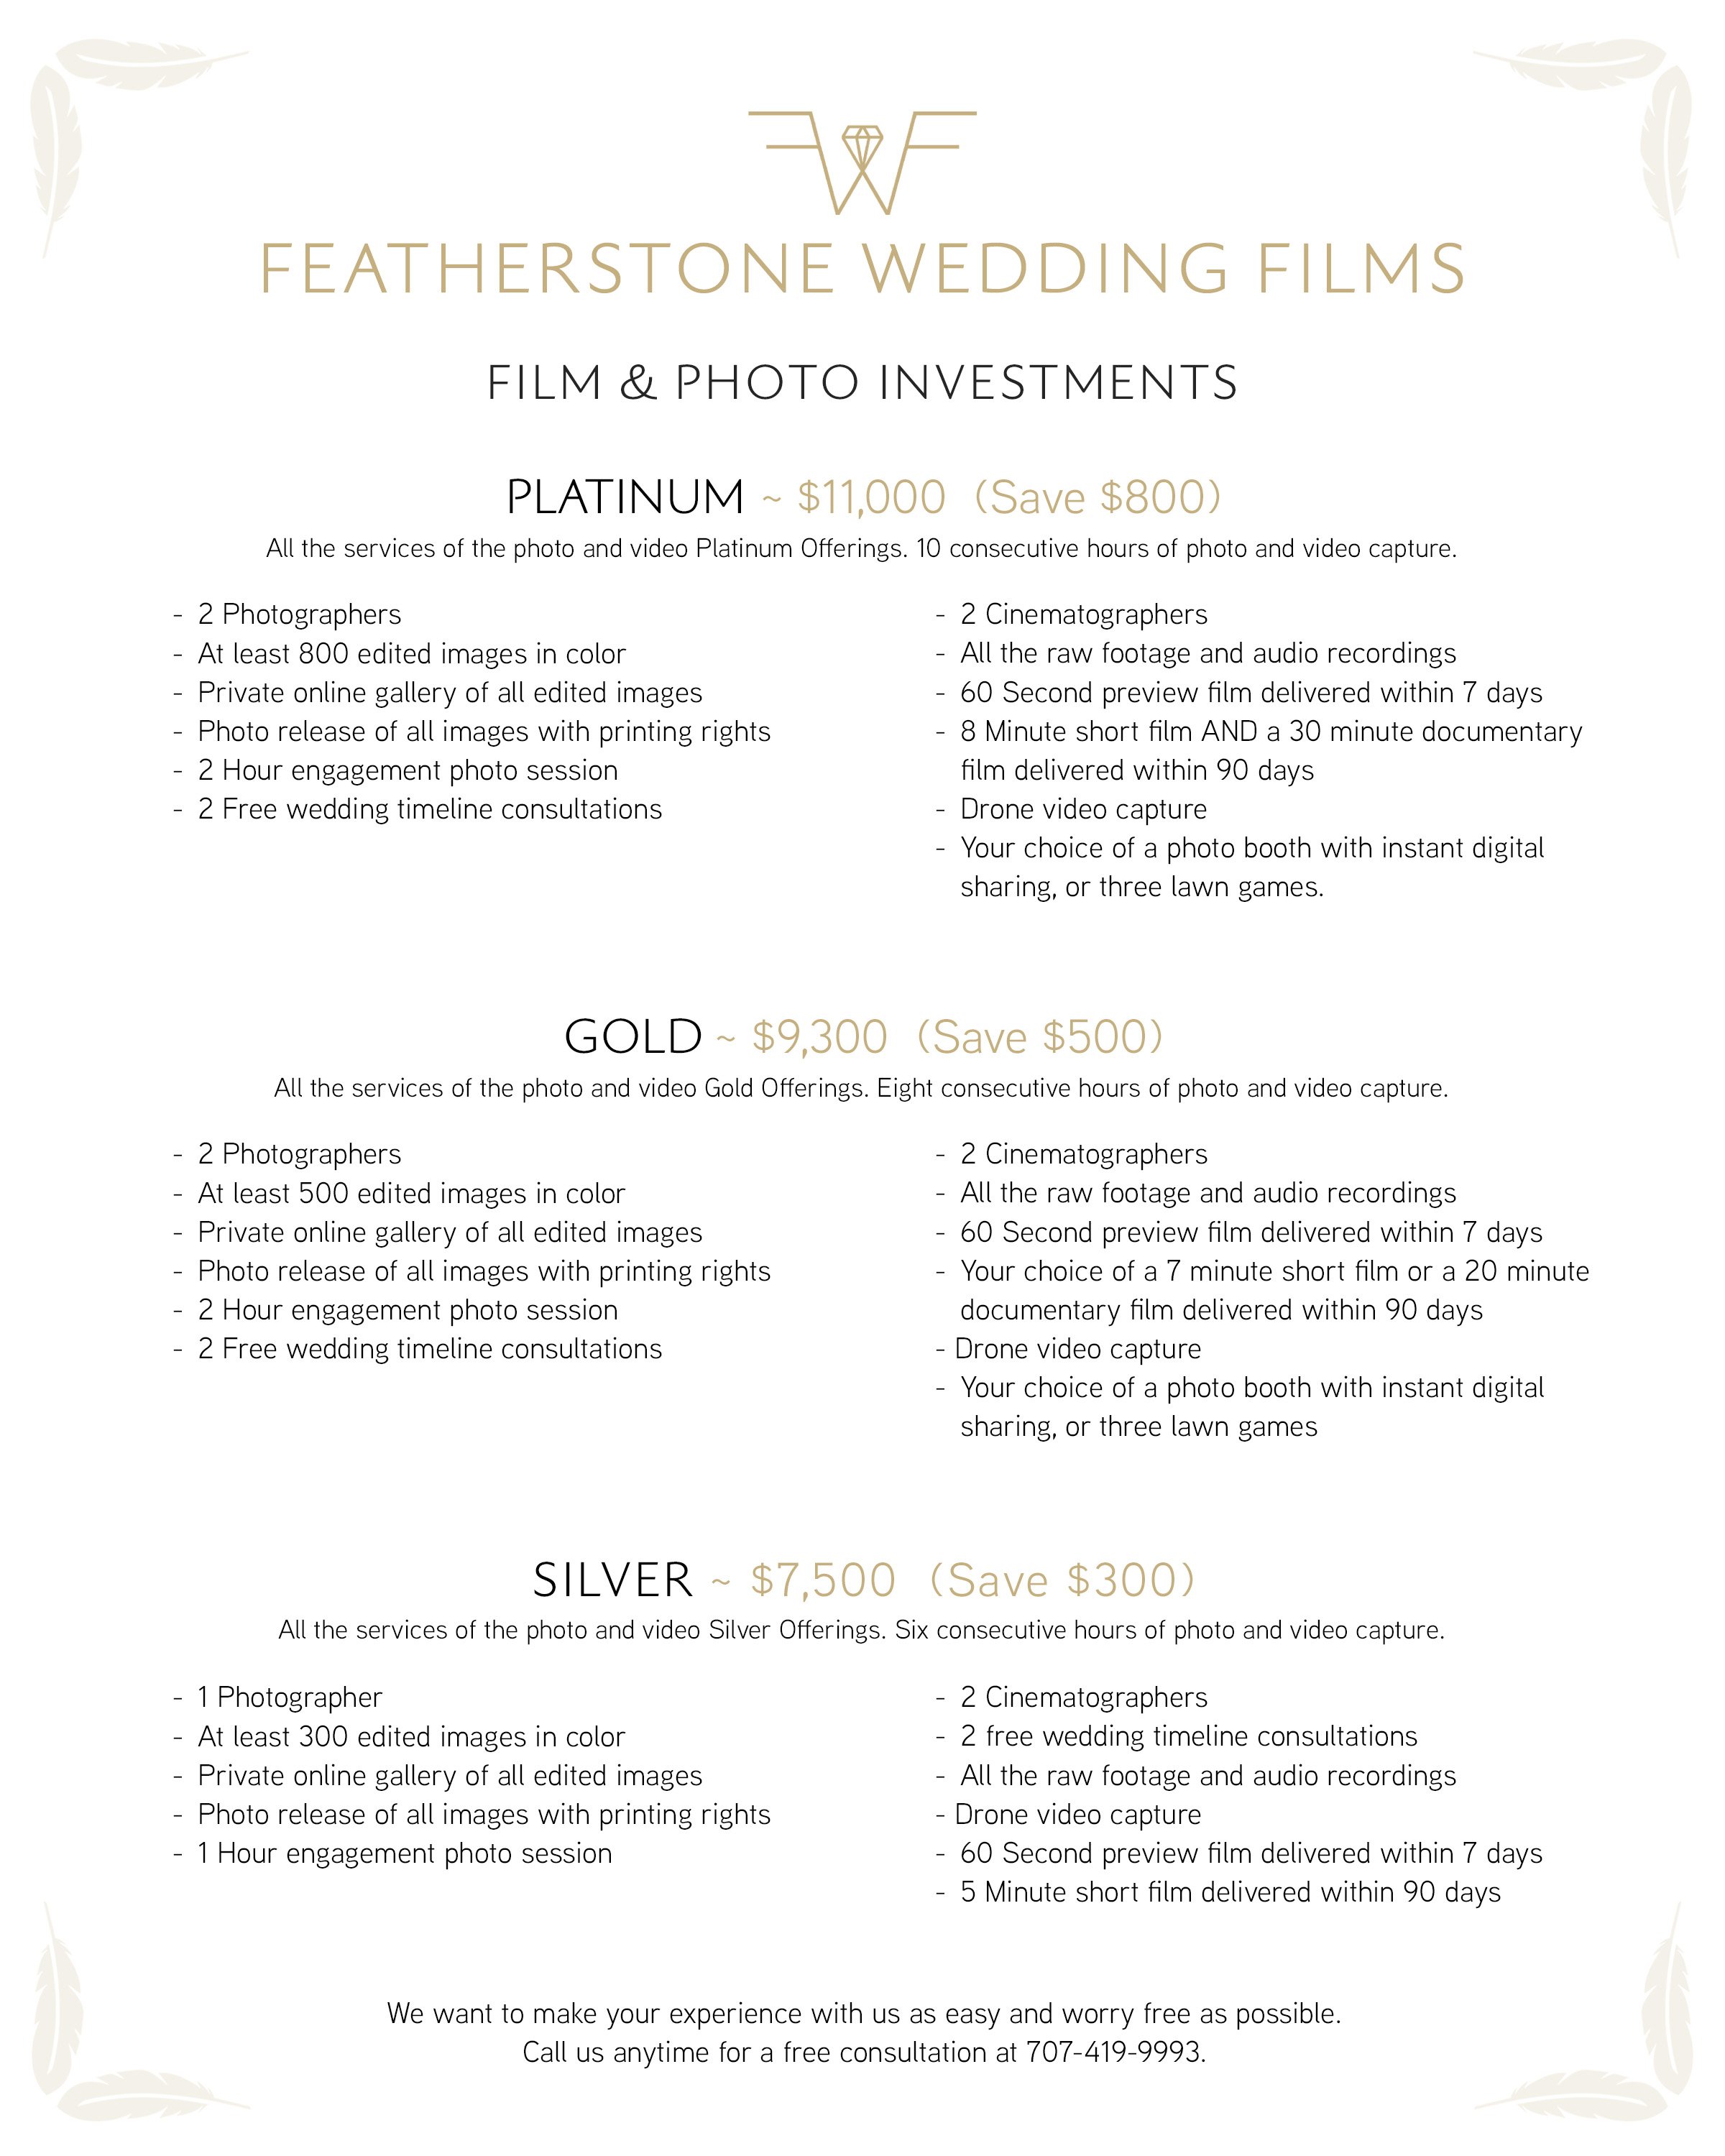 Featherstone Wedding Films - Photo and Video Combo Package Price Guide.jpg